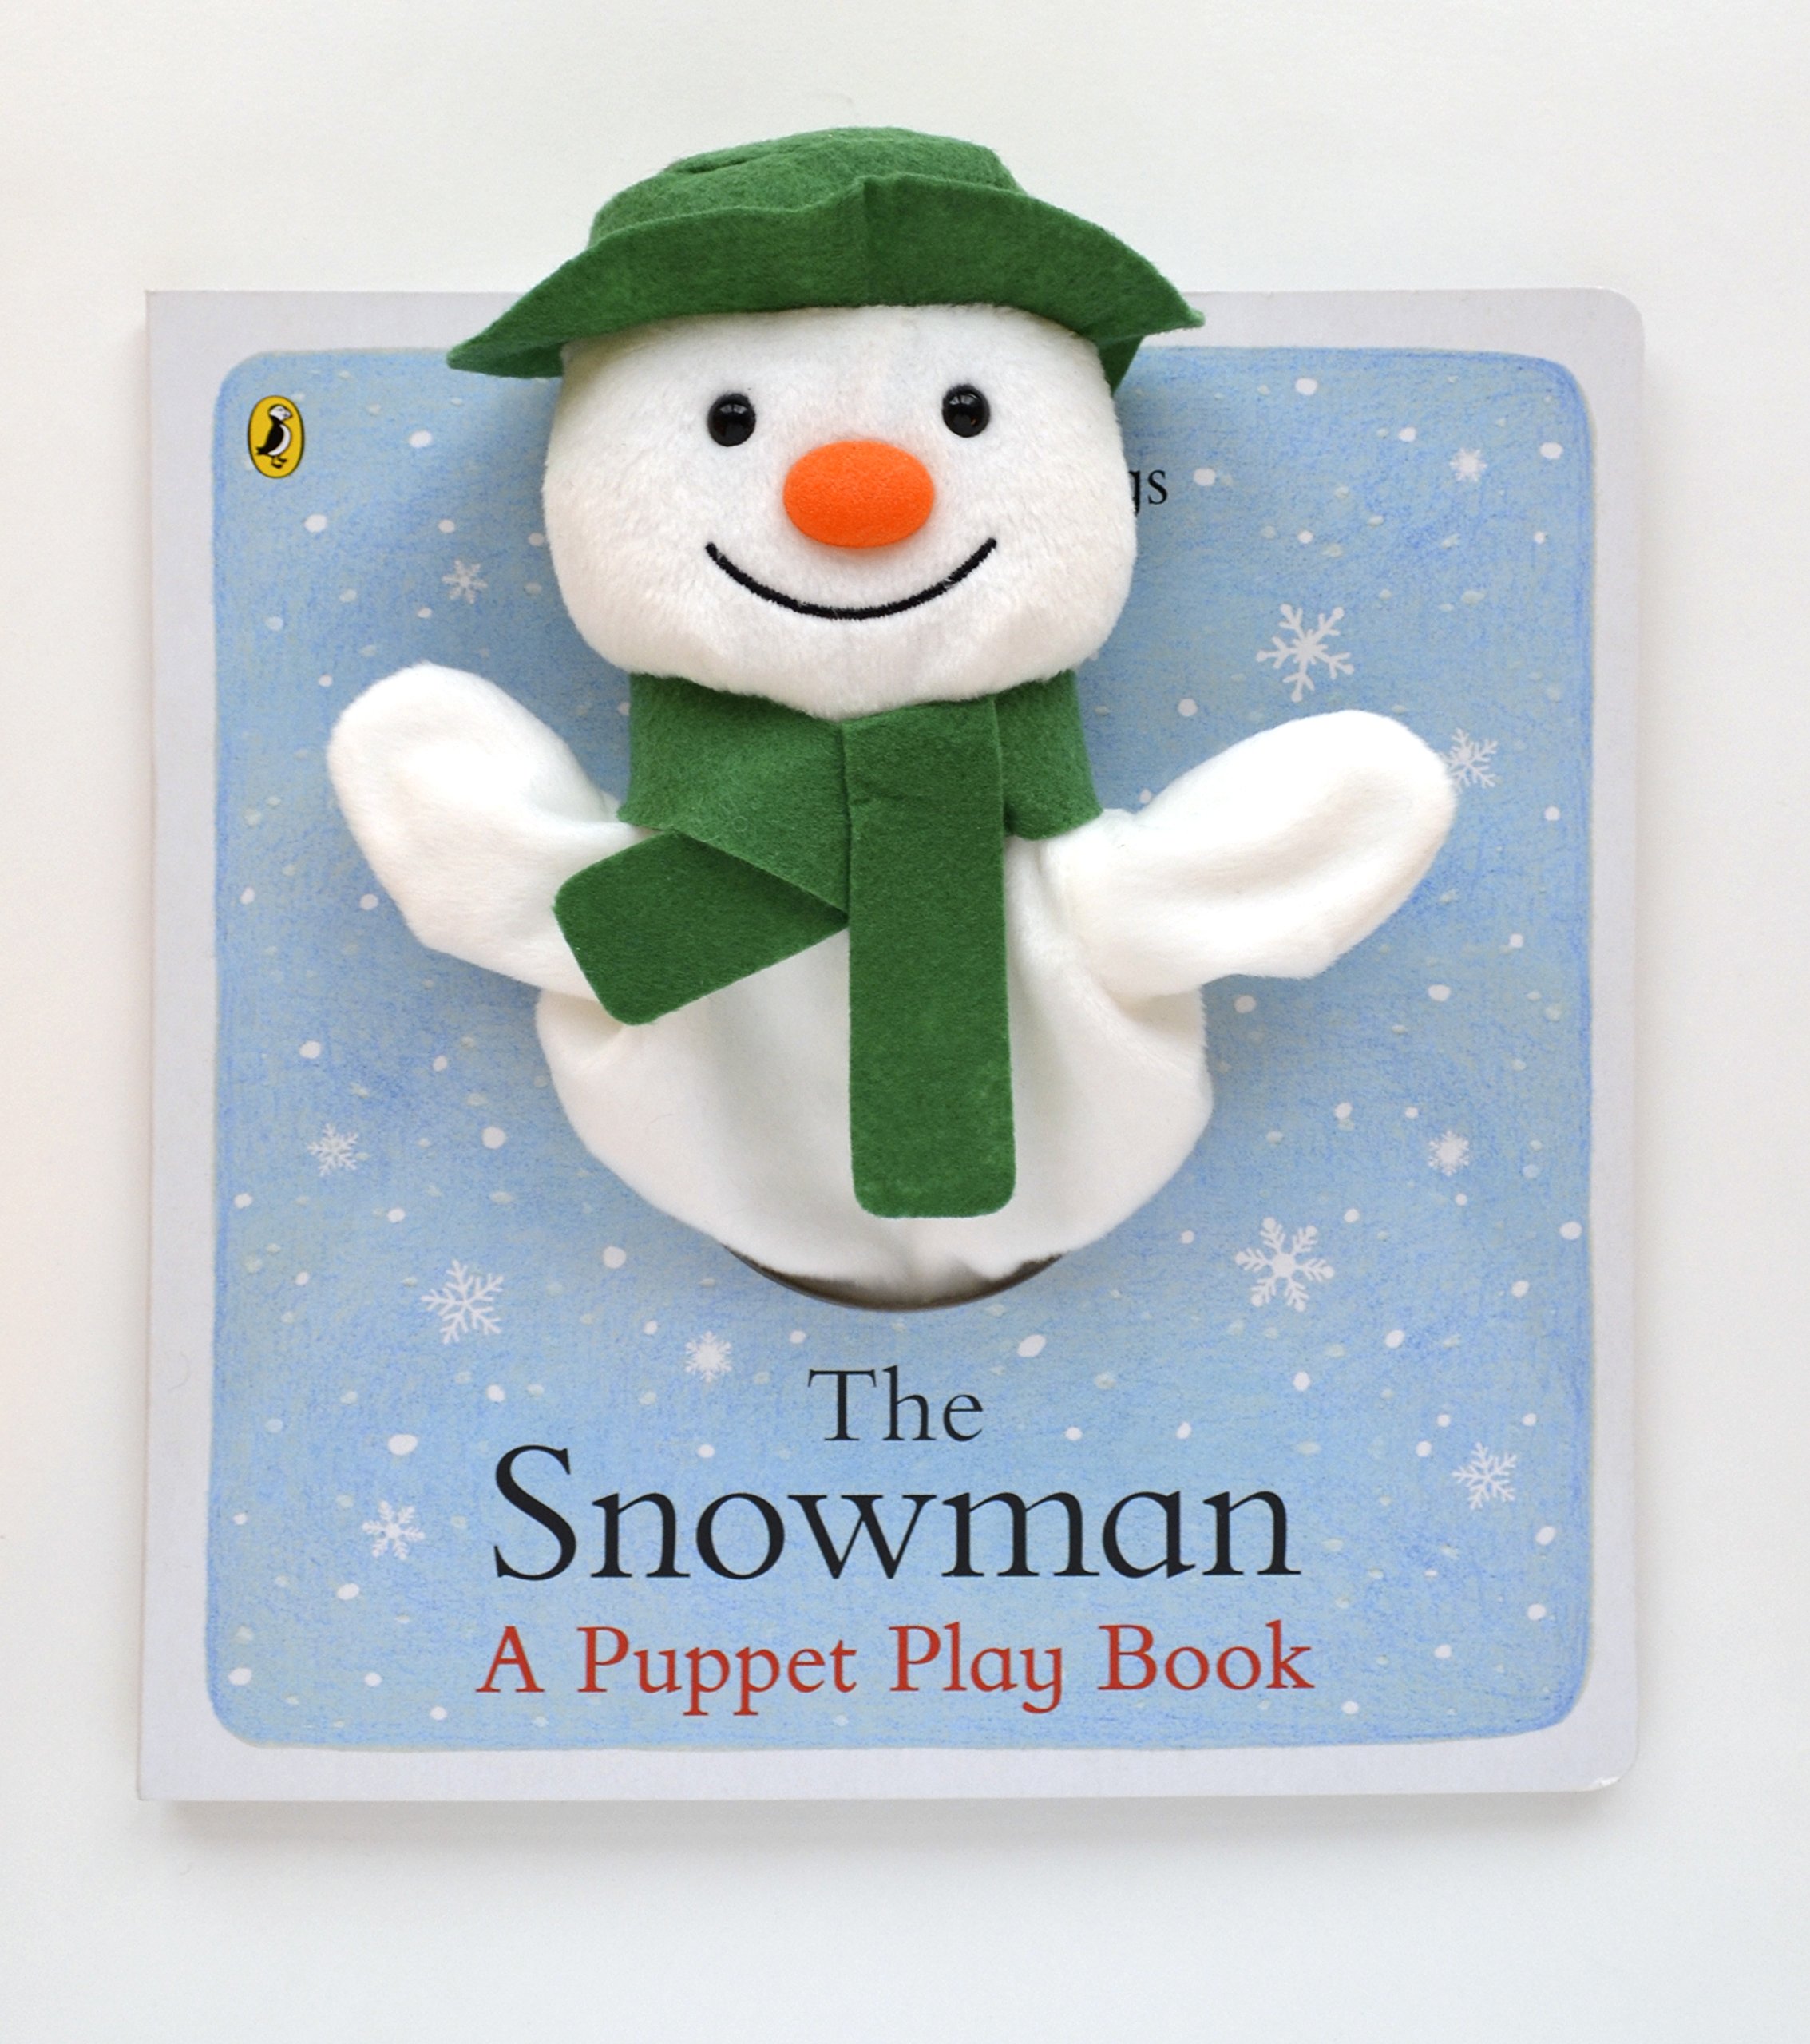 The Snowman: A Puppet Play Book: Amazon.co.uk: Raymond Briggs ...